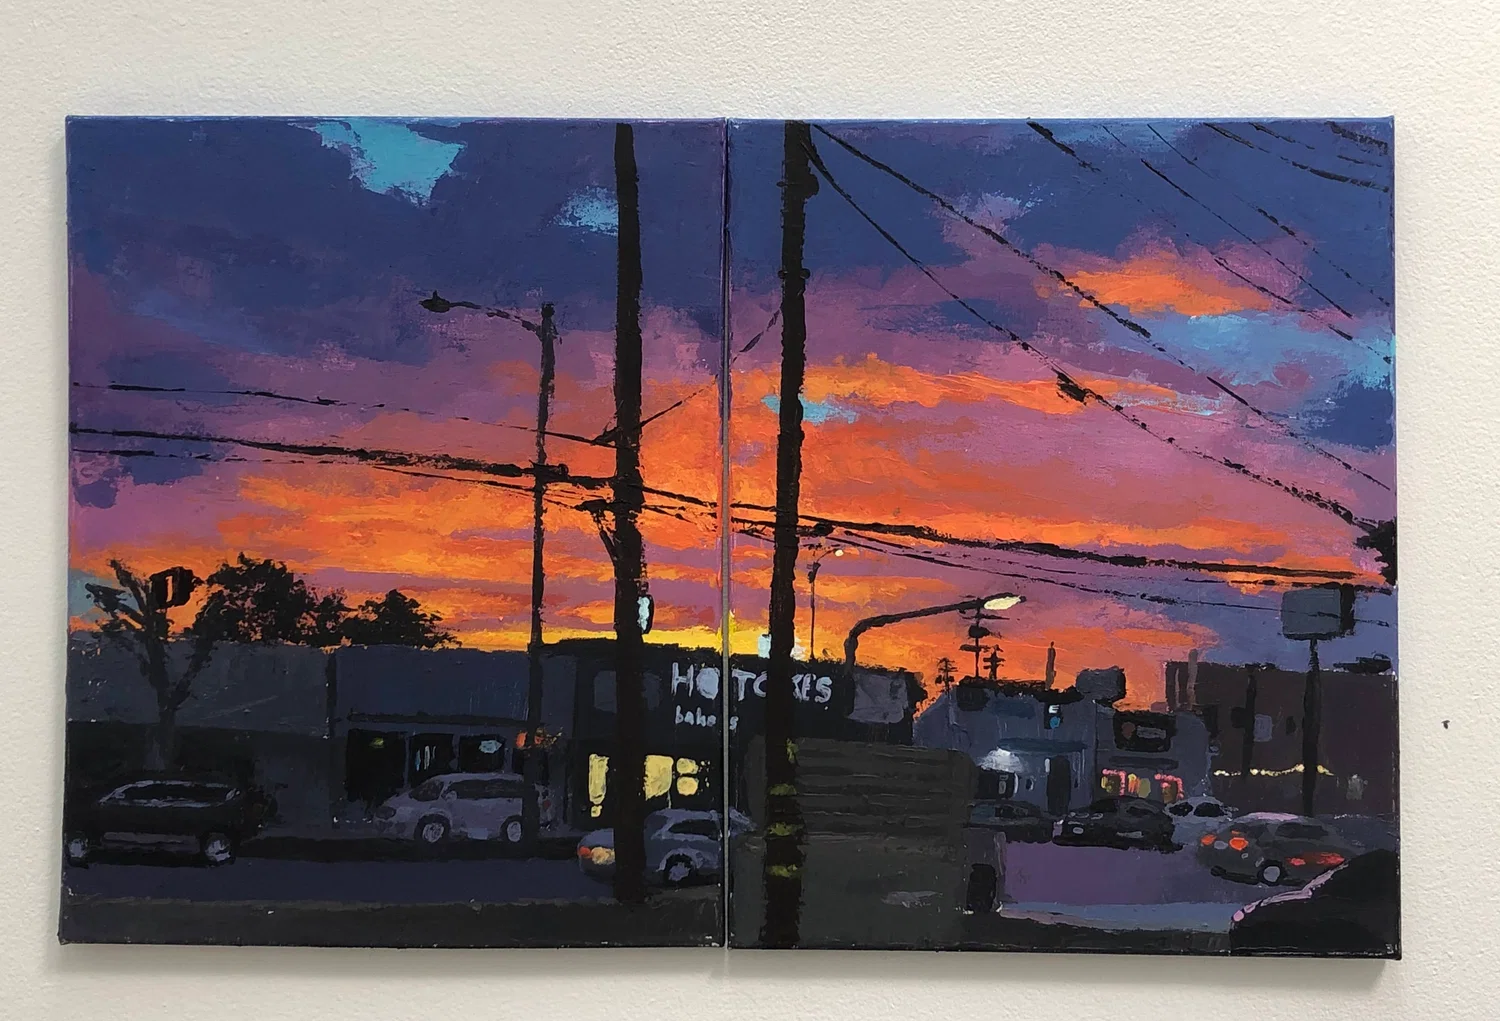 Saul Lopez Hernandez, S Centinela Ave., 2023, Acrylic on Canvas, 20 inches x 32 inches x ½ inch